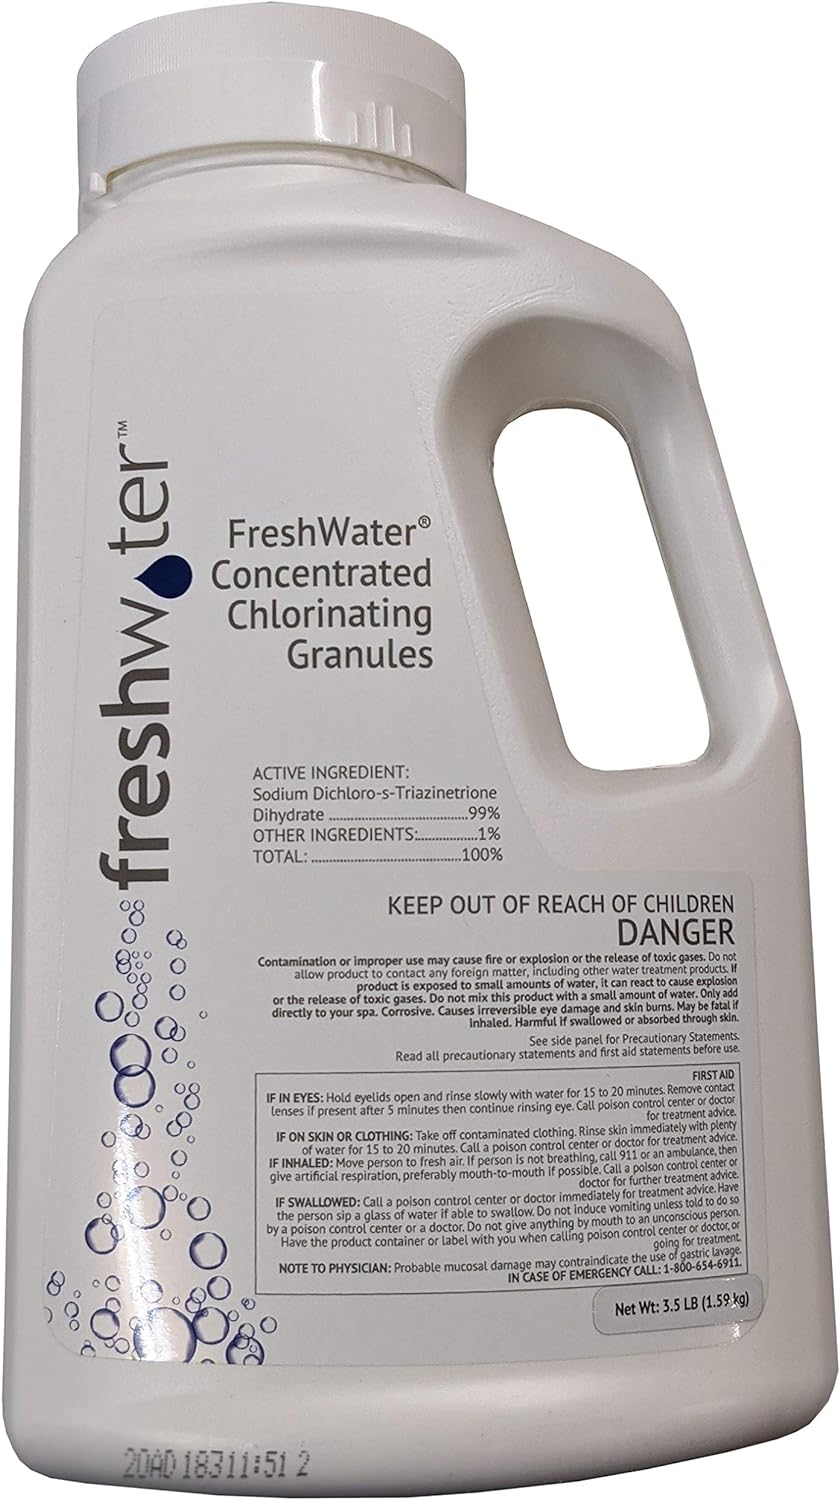 I trust Hot Springs products. This concentrated chlorine works well.